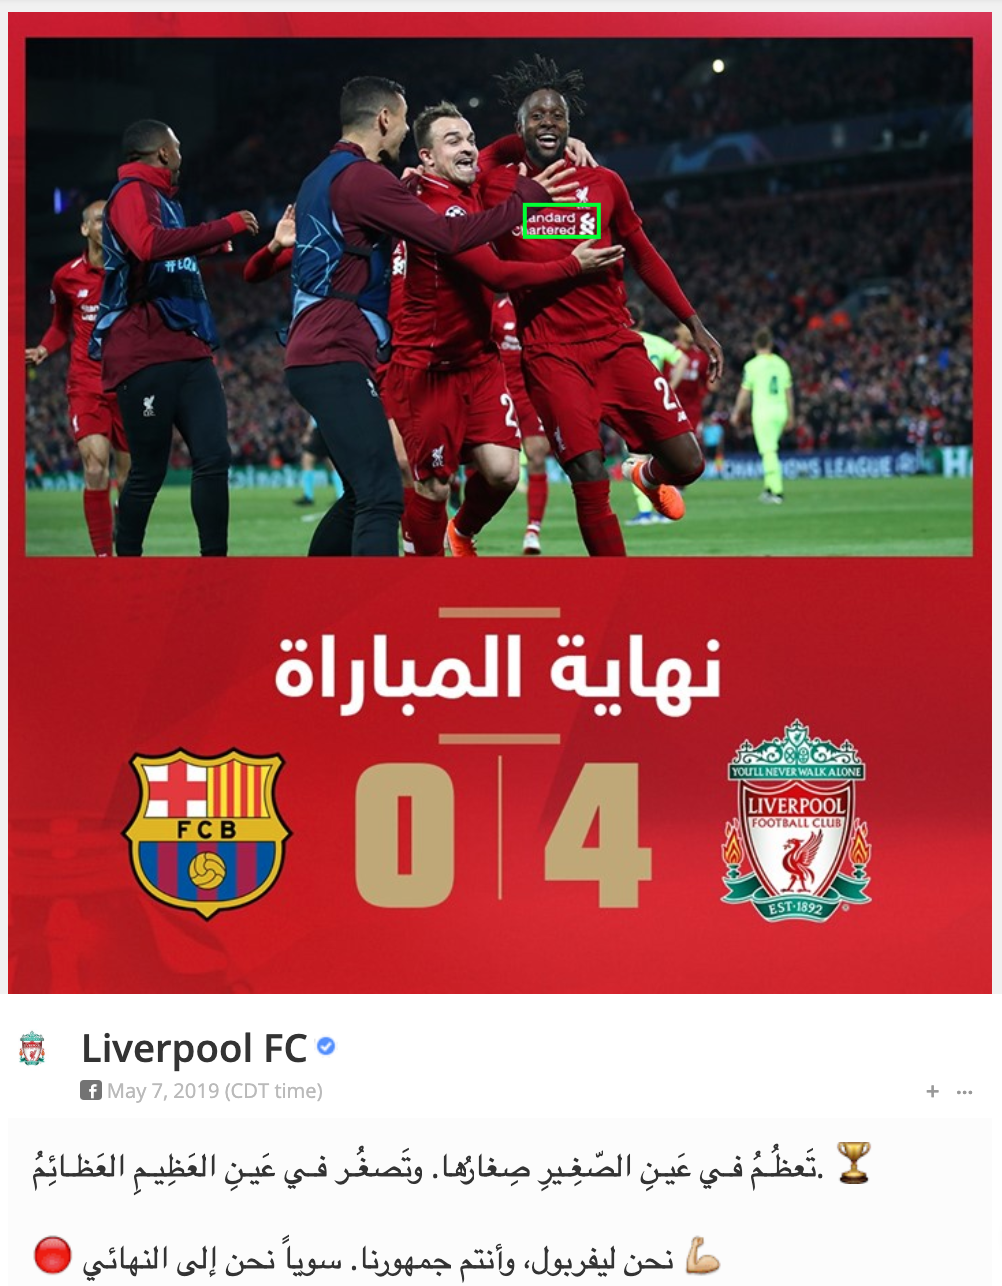 Liverpool FC defeating FC Barcelona CL